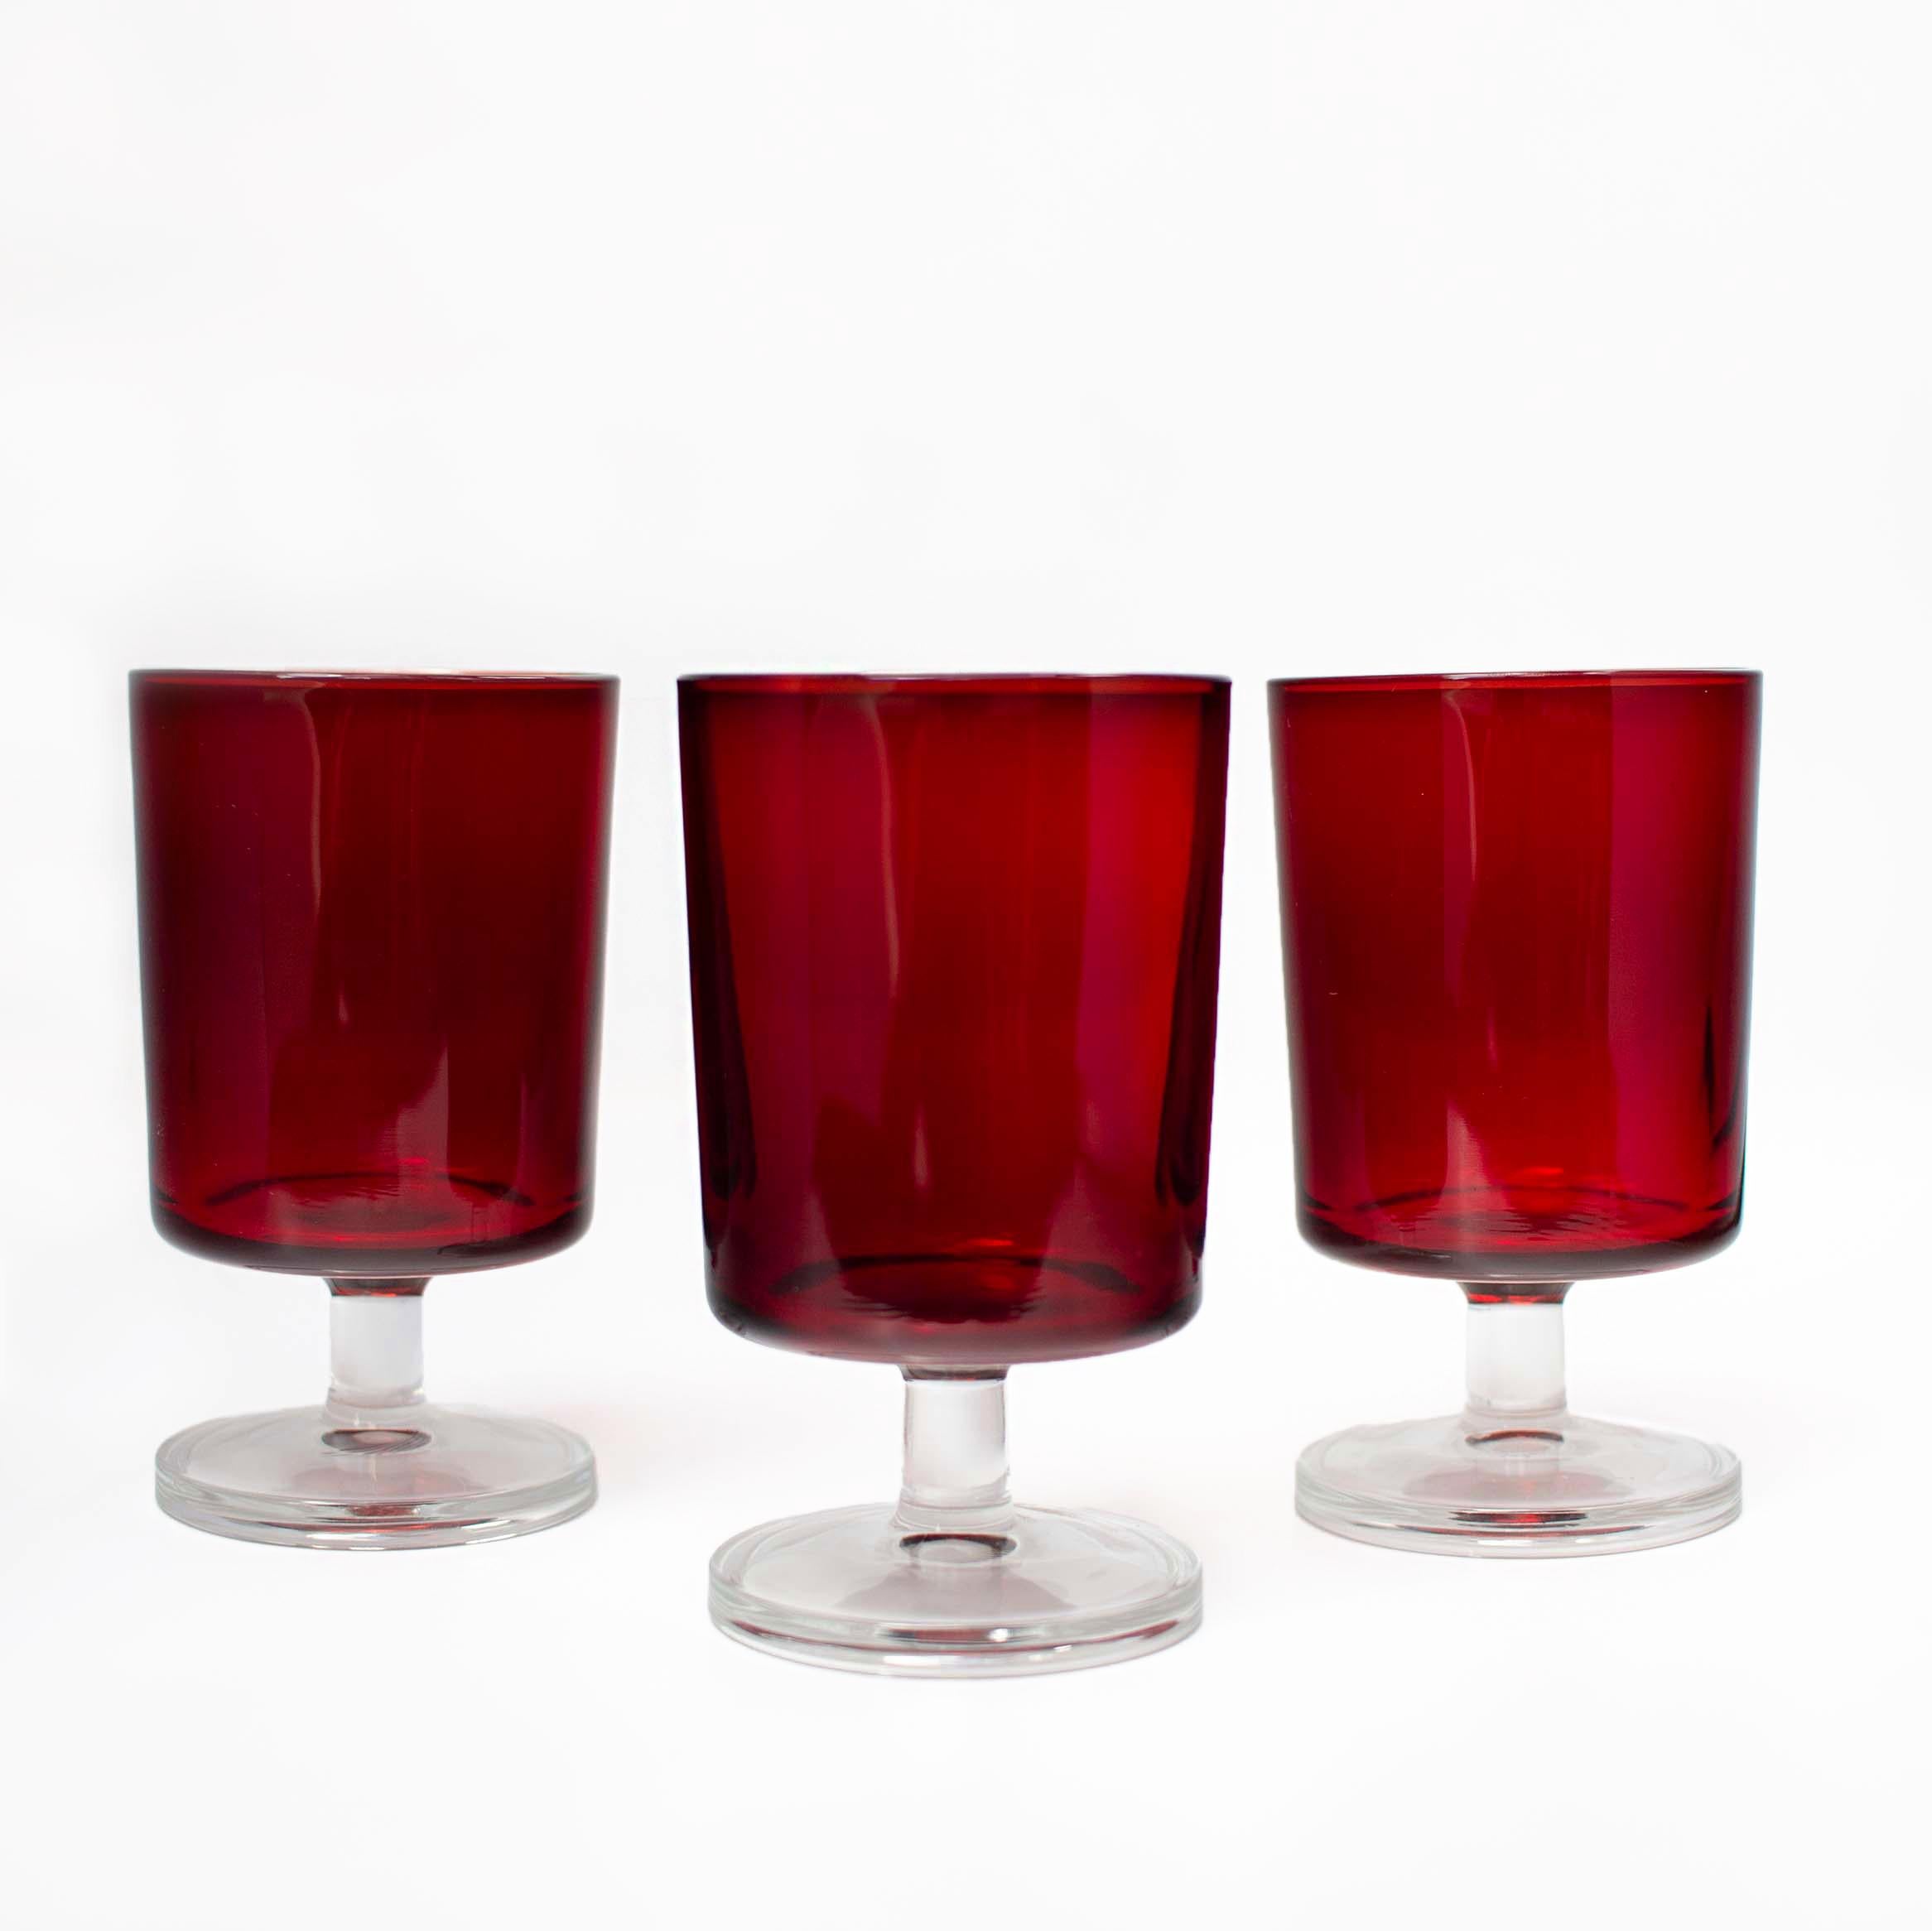 Arcoroc ruby cordial glasses by J.G. Durand

Made in France
Set of 3
2.5 x 4.5 in / each
1960s
Glass

A set of three Arcoroc clear stemmed deep ruby red cordial glasses, perfect to complete that cocktail Shaker set or for your bar area. 



All